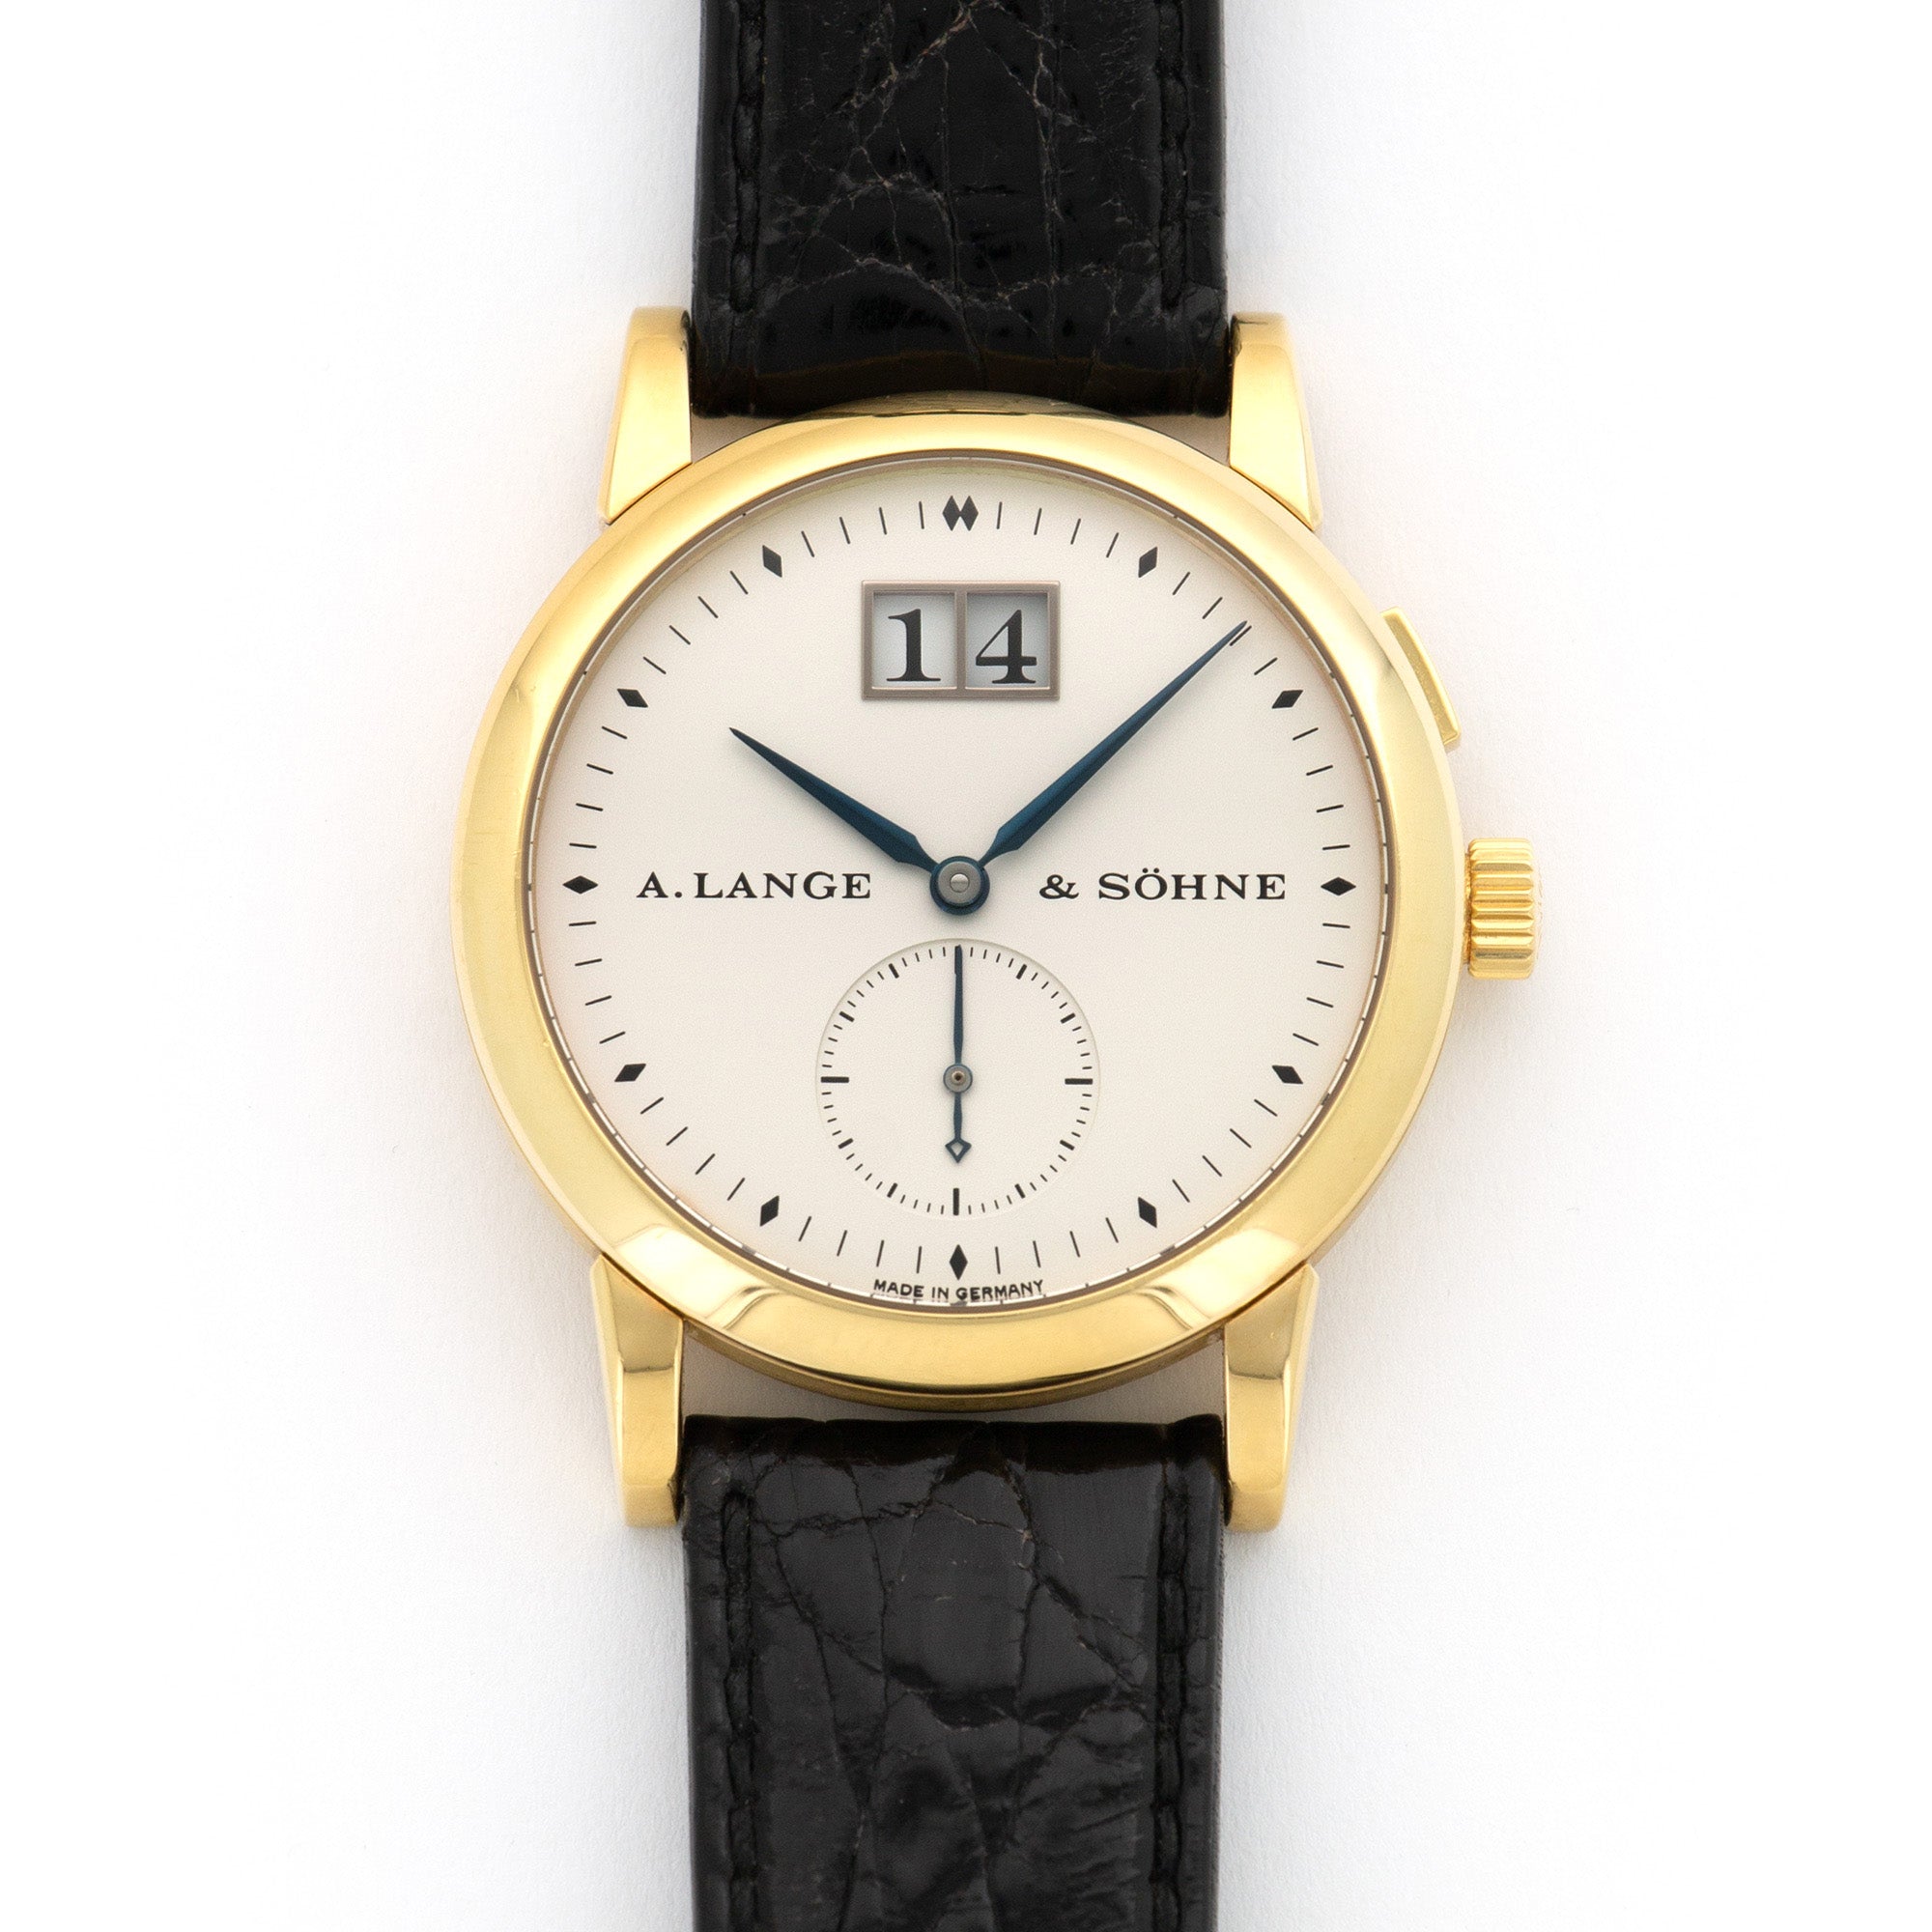 A. Lange & Sohne - A. Lange & Sohne Yellow Gold Saxonia 1st Series Watch Ref. 102.002 - The Keystone Watches